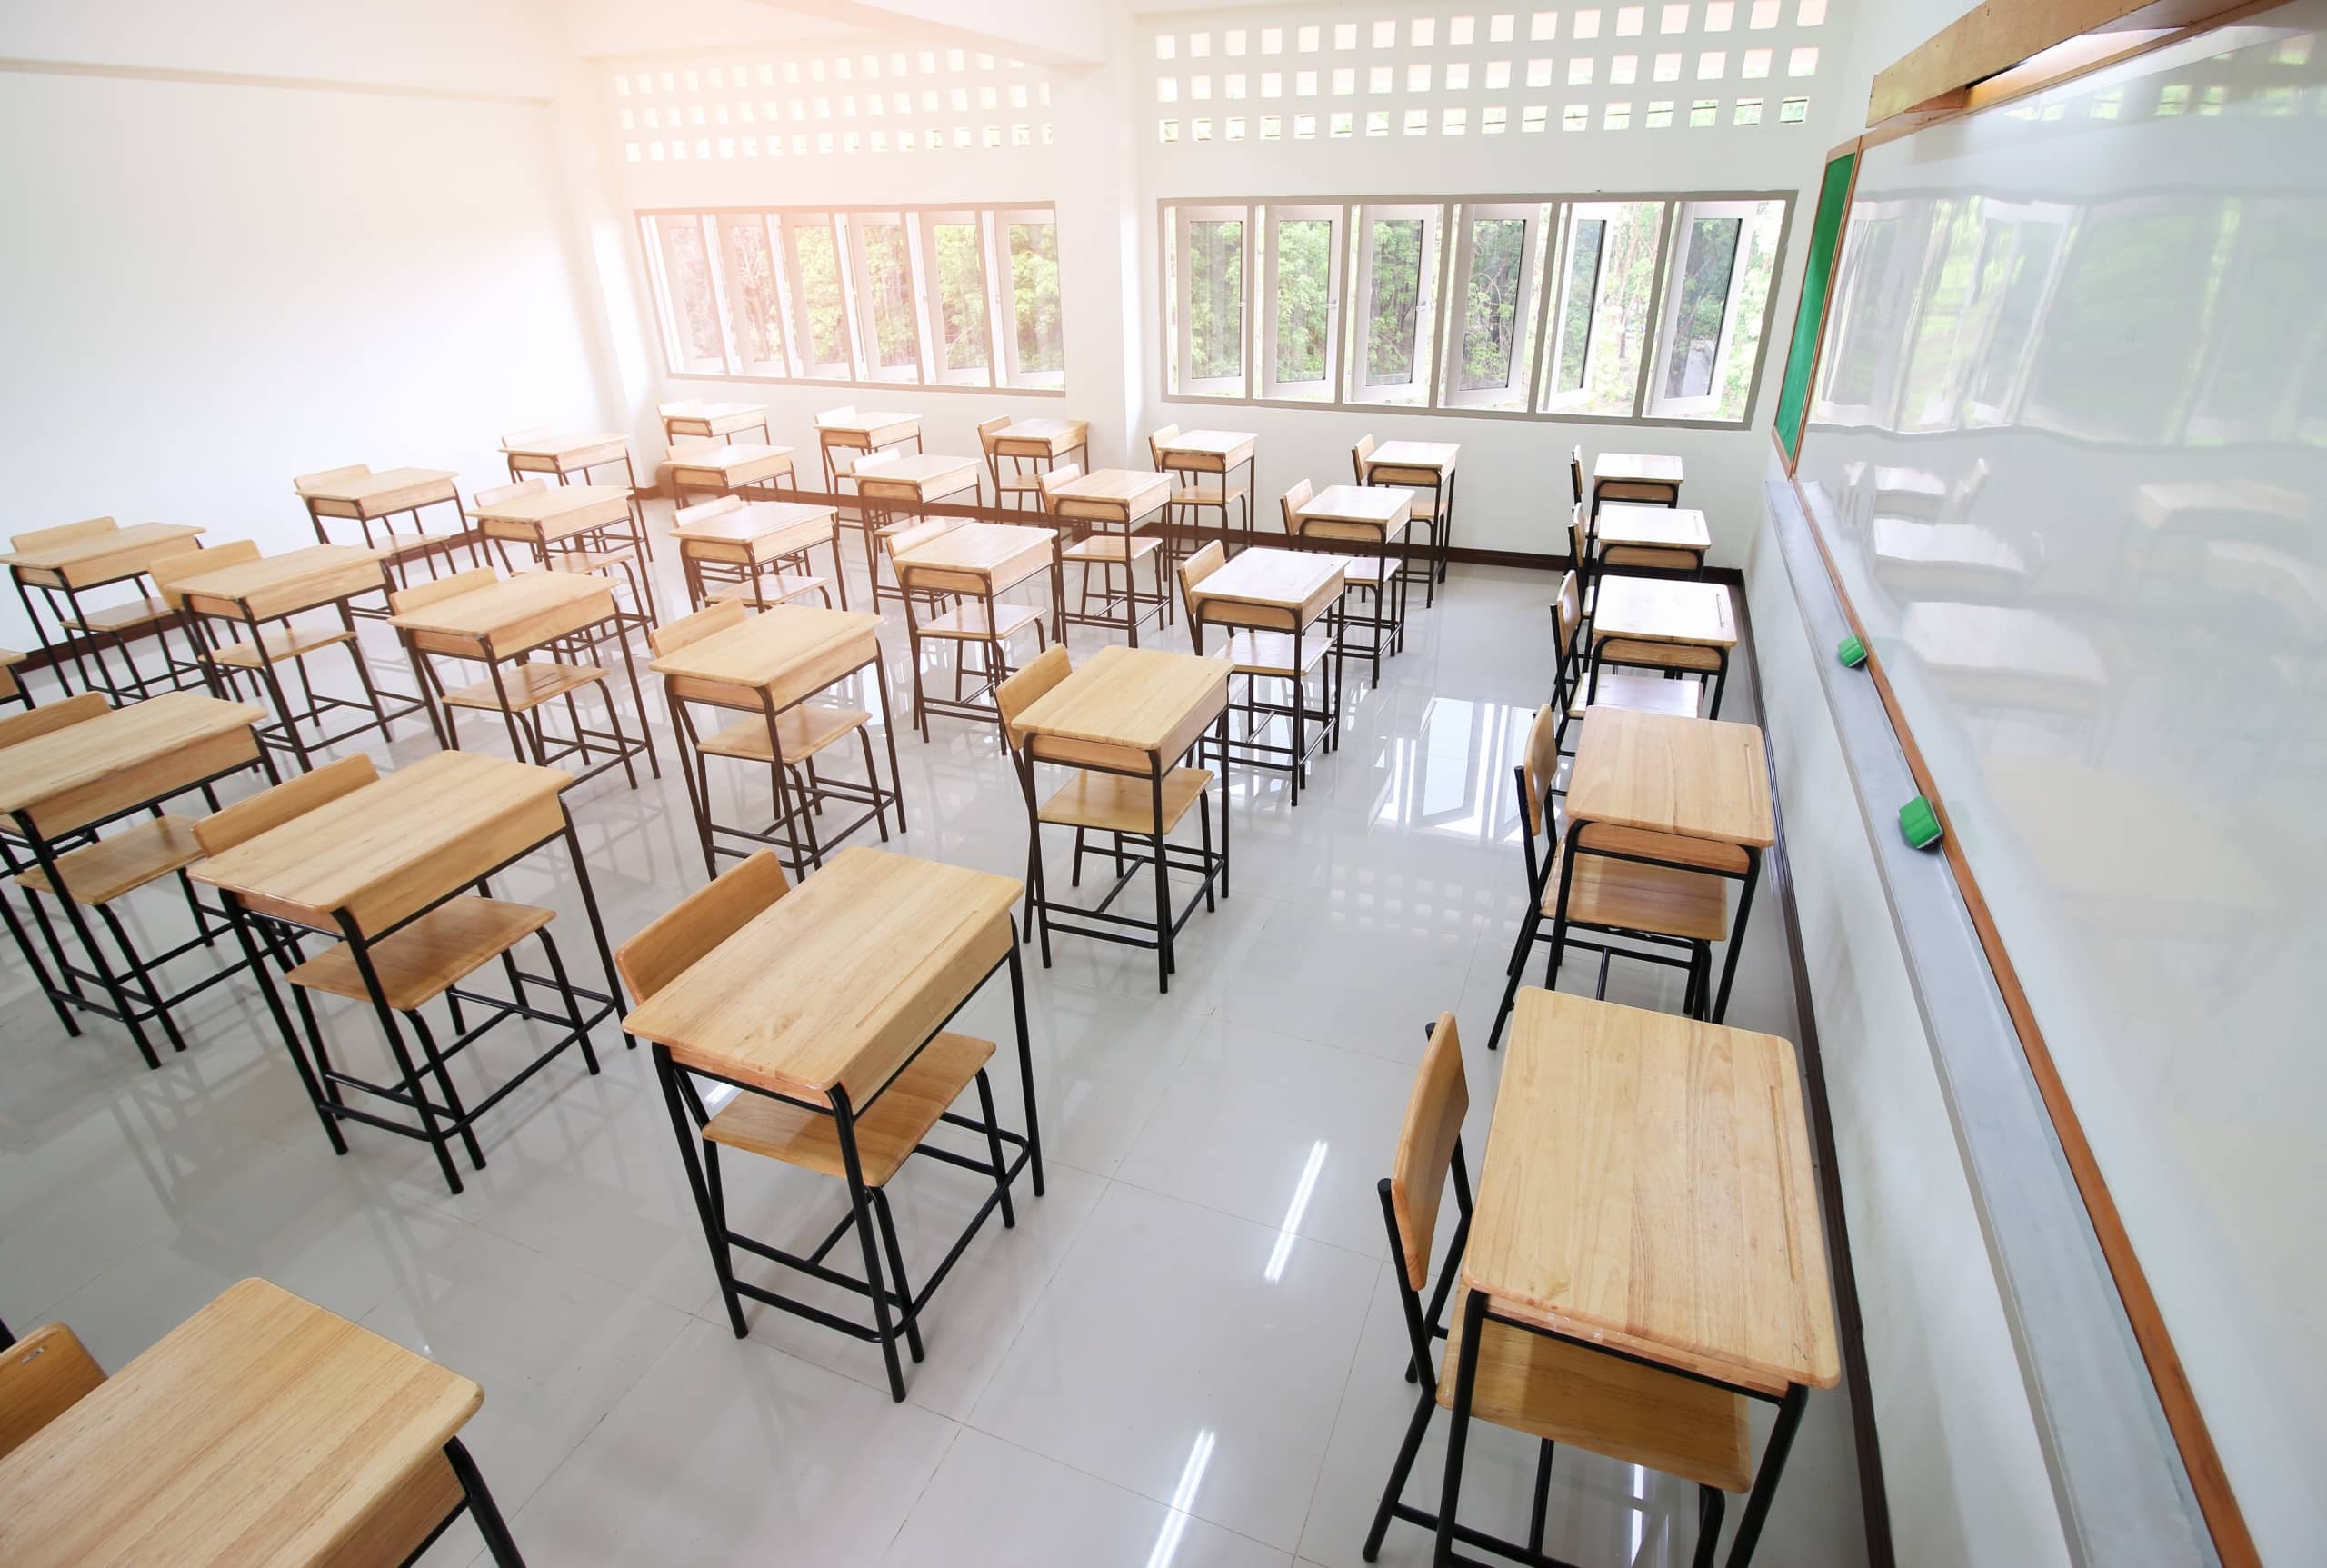 Overhead view of a sunny classroom with empty desks